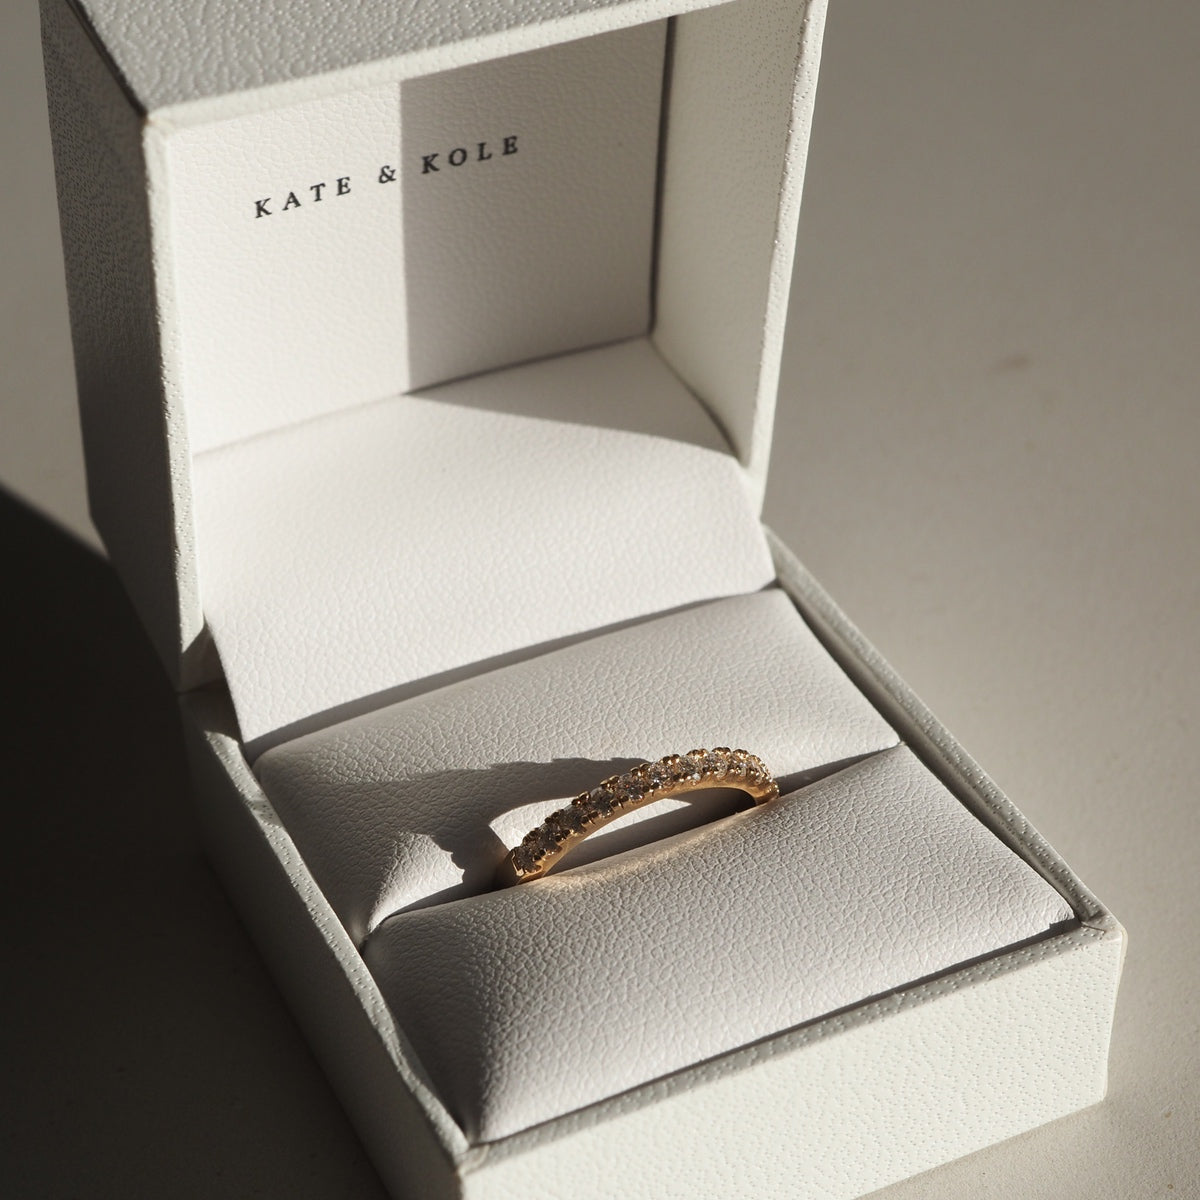 Amaré 1.4mm diamond wedding band set in 18ct yellow gold sitting in Kate and Kole white leather ring box 